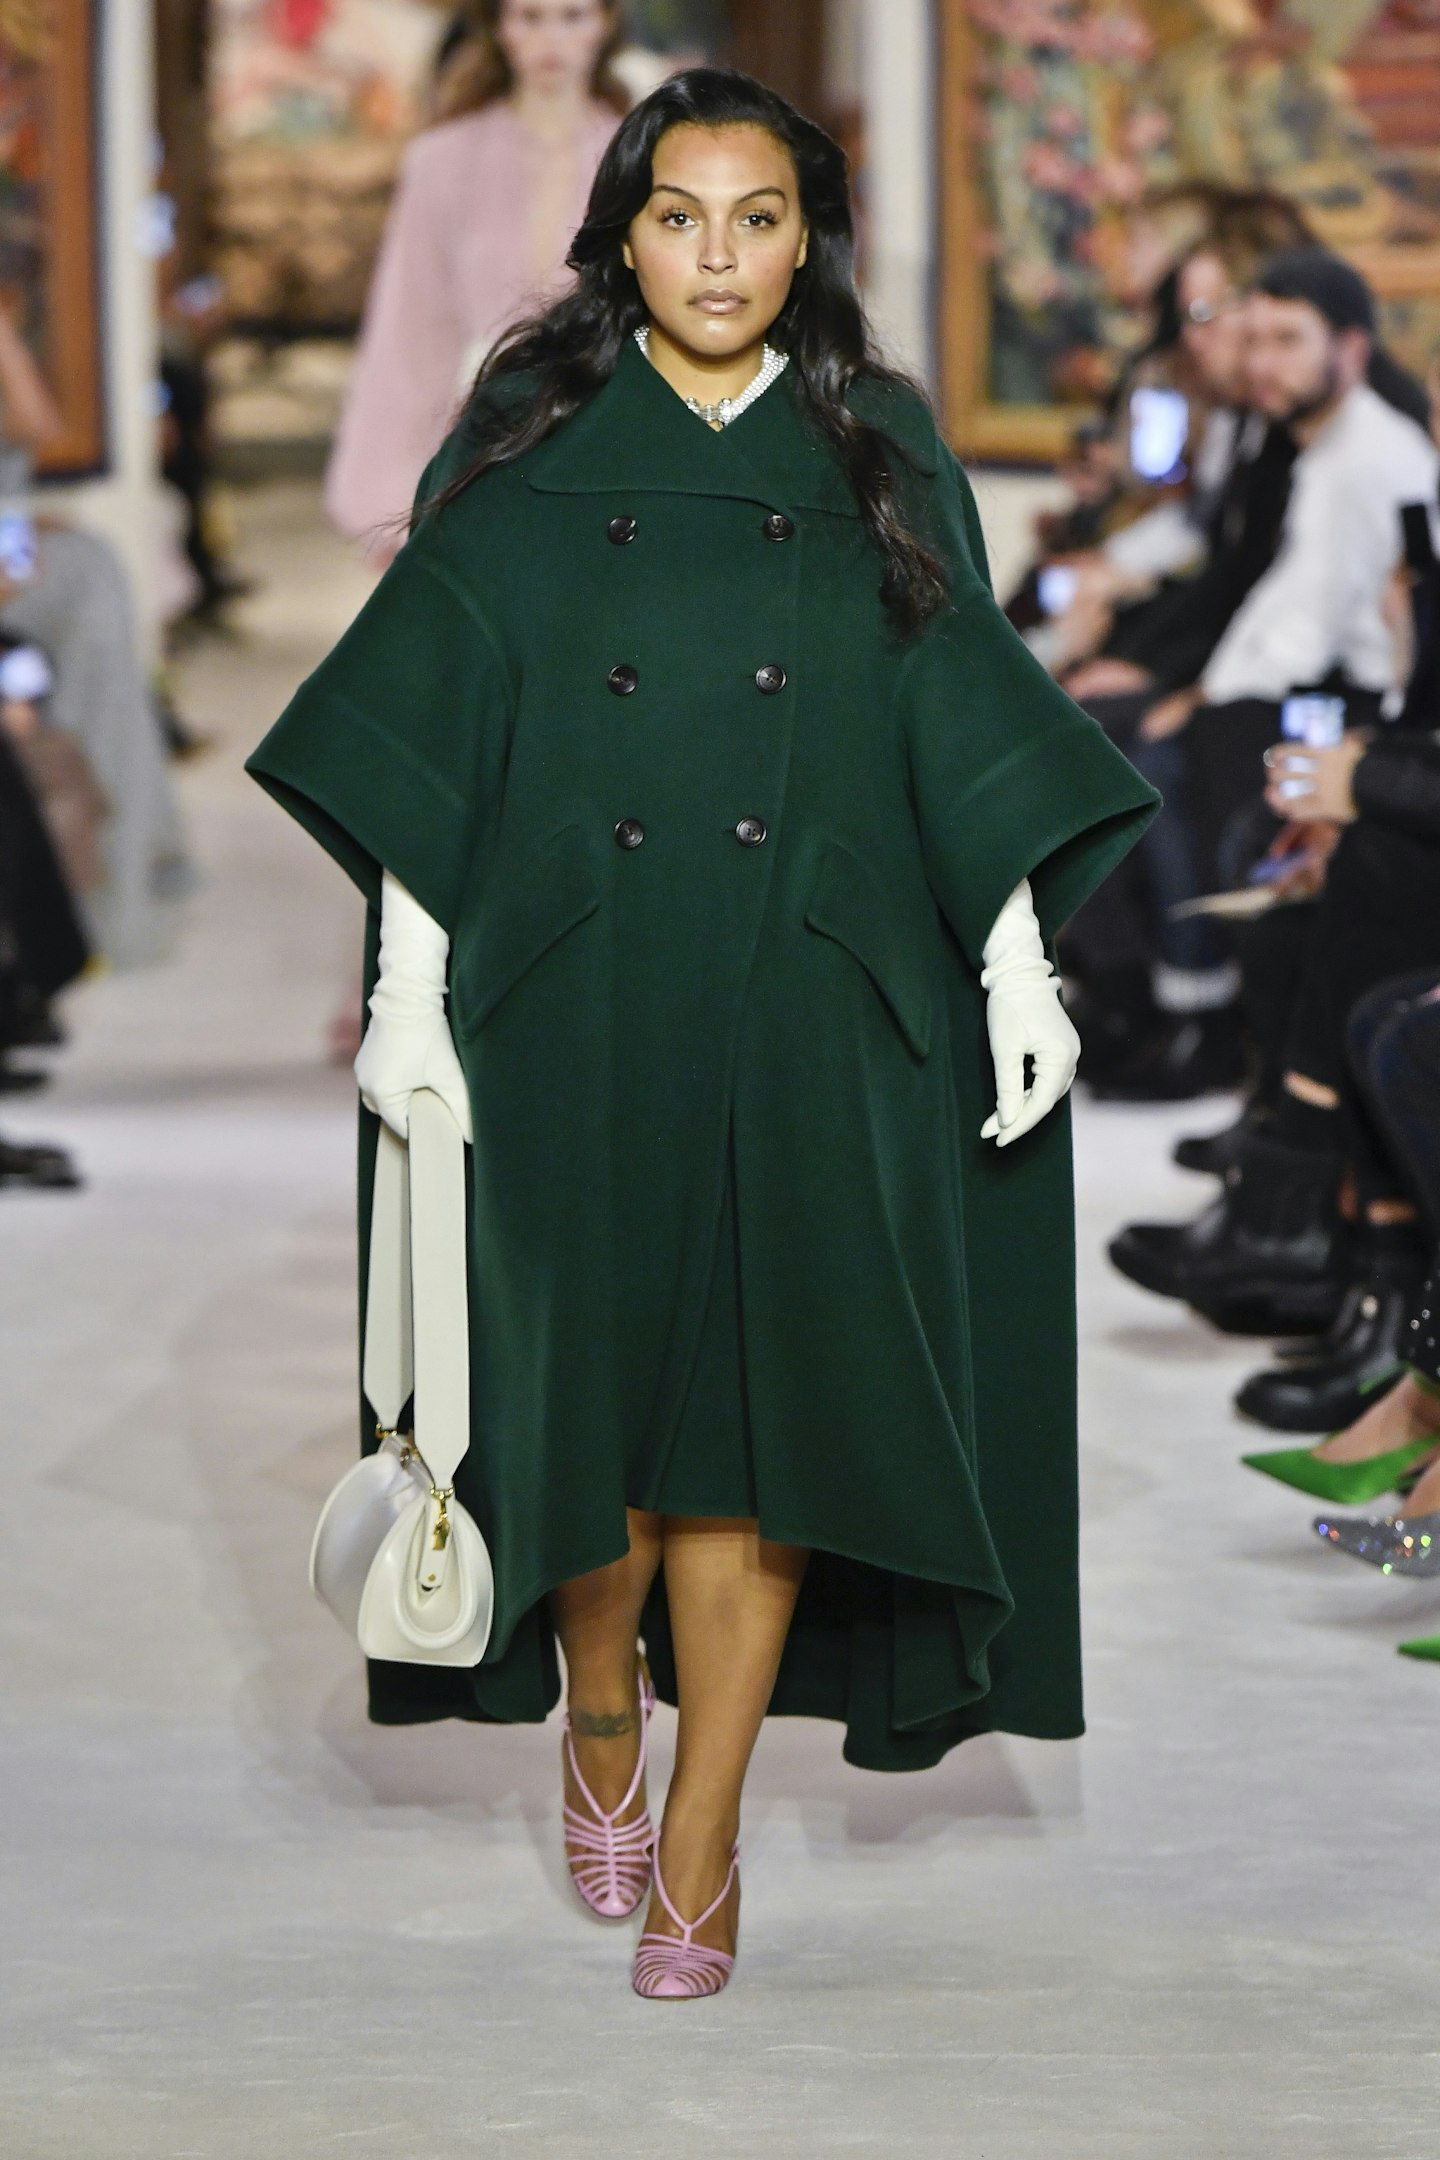 Lanvin goes oh-so-ladylike